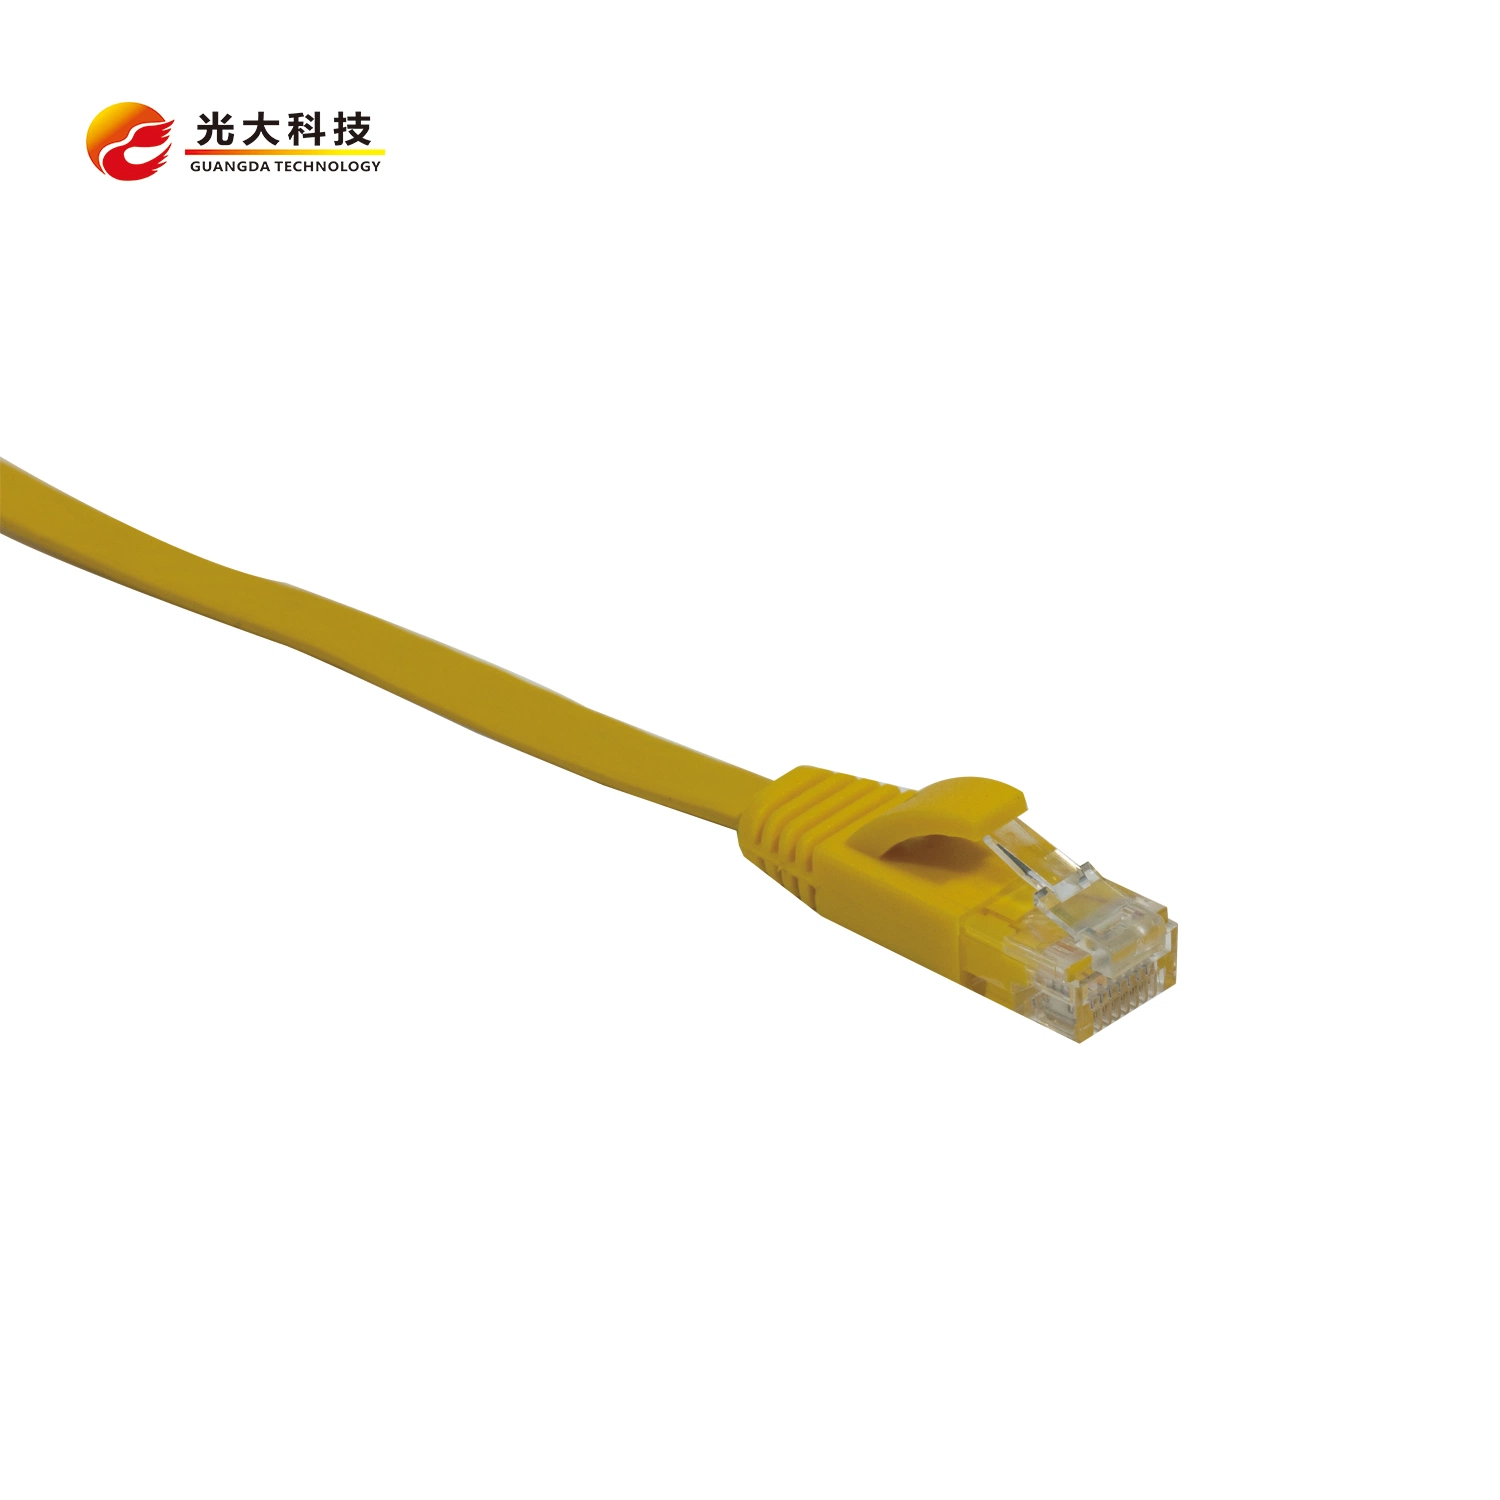 Outdoor 305m 4pair Double Sheath Solid Copper CAT6A Network Cable Ethernet LAN Computer CAT6 Cable STP FTP SFTP